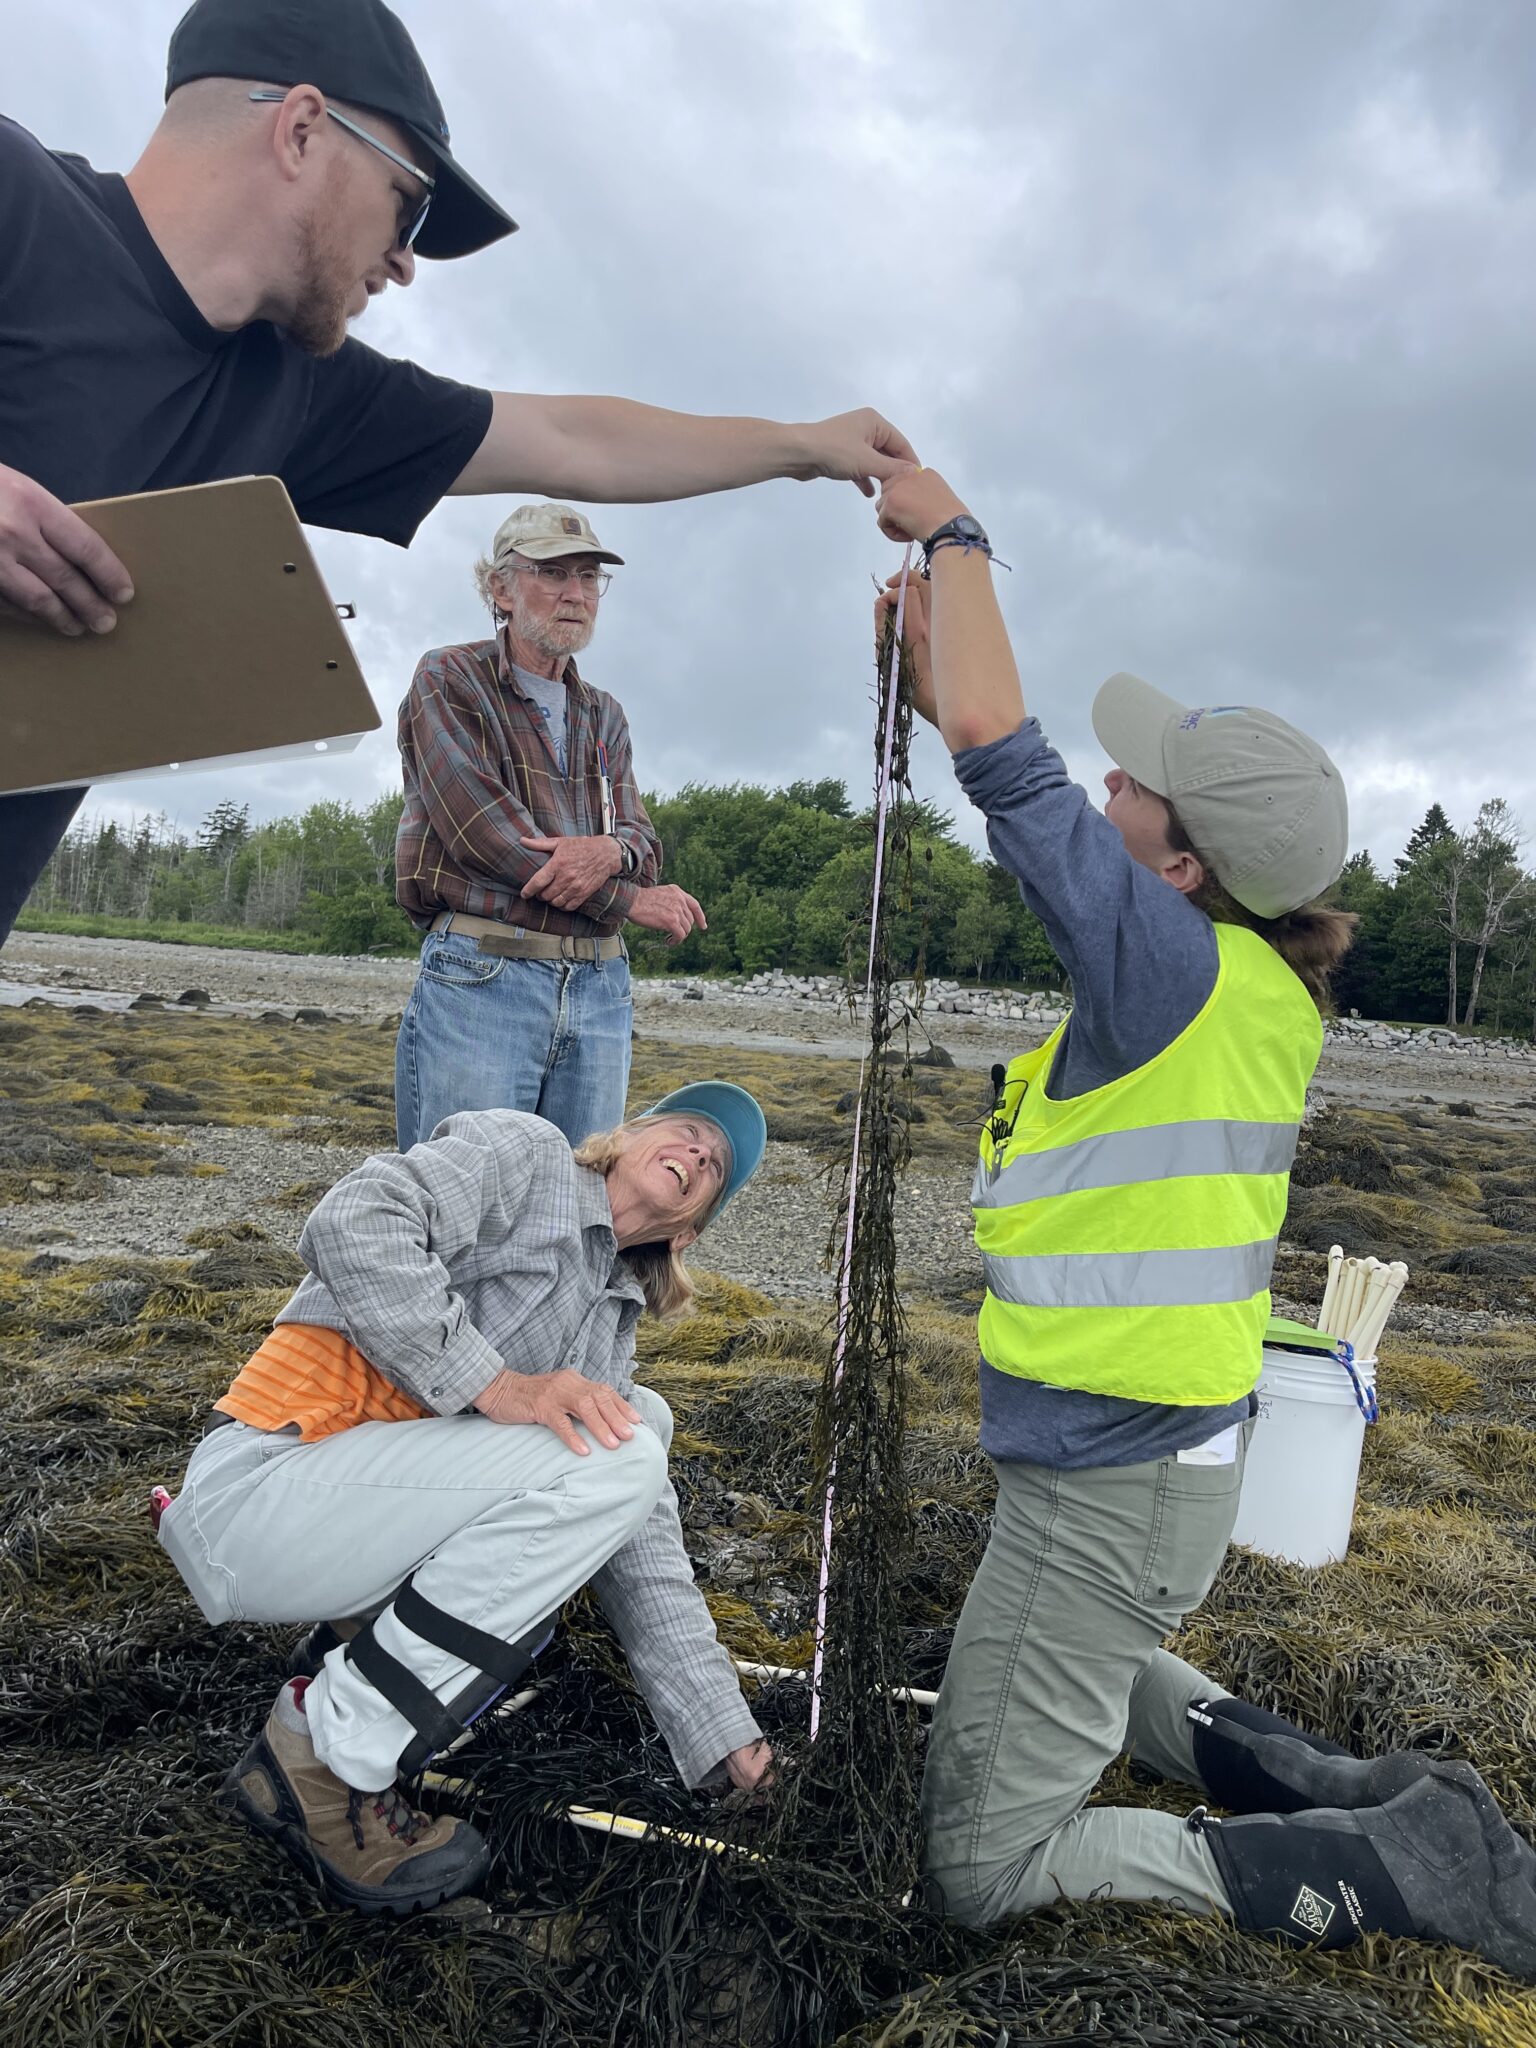 Two people crouch on the ground holding up a piece of rockweed to measure it with a tape measure. One person is standing up holding the rockweed slightly out of frame and another stands in the background watching.